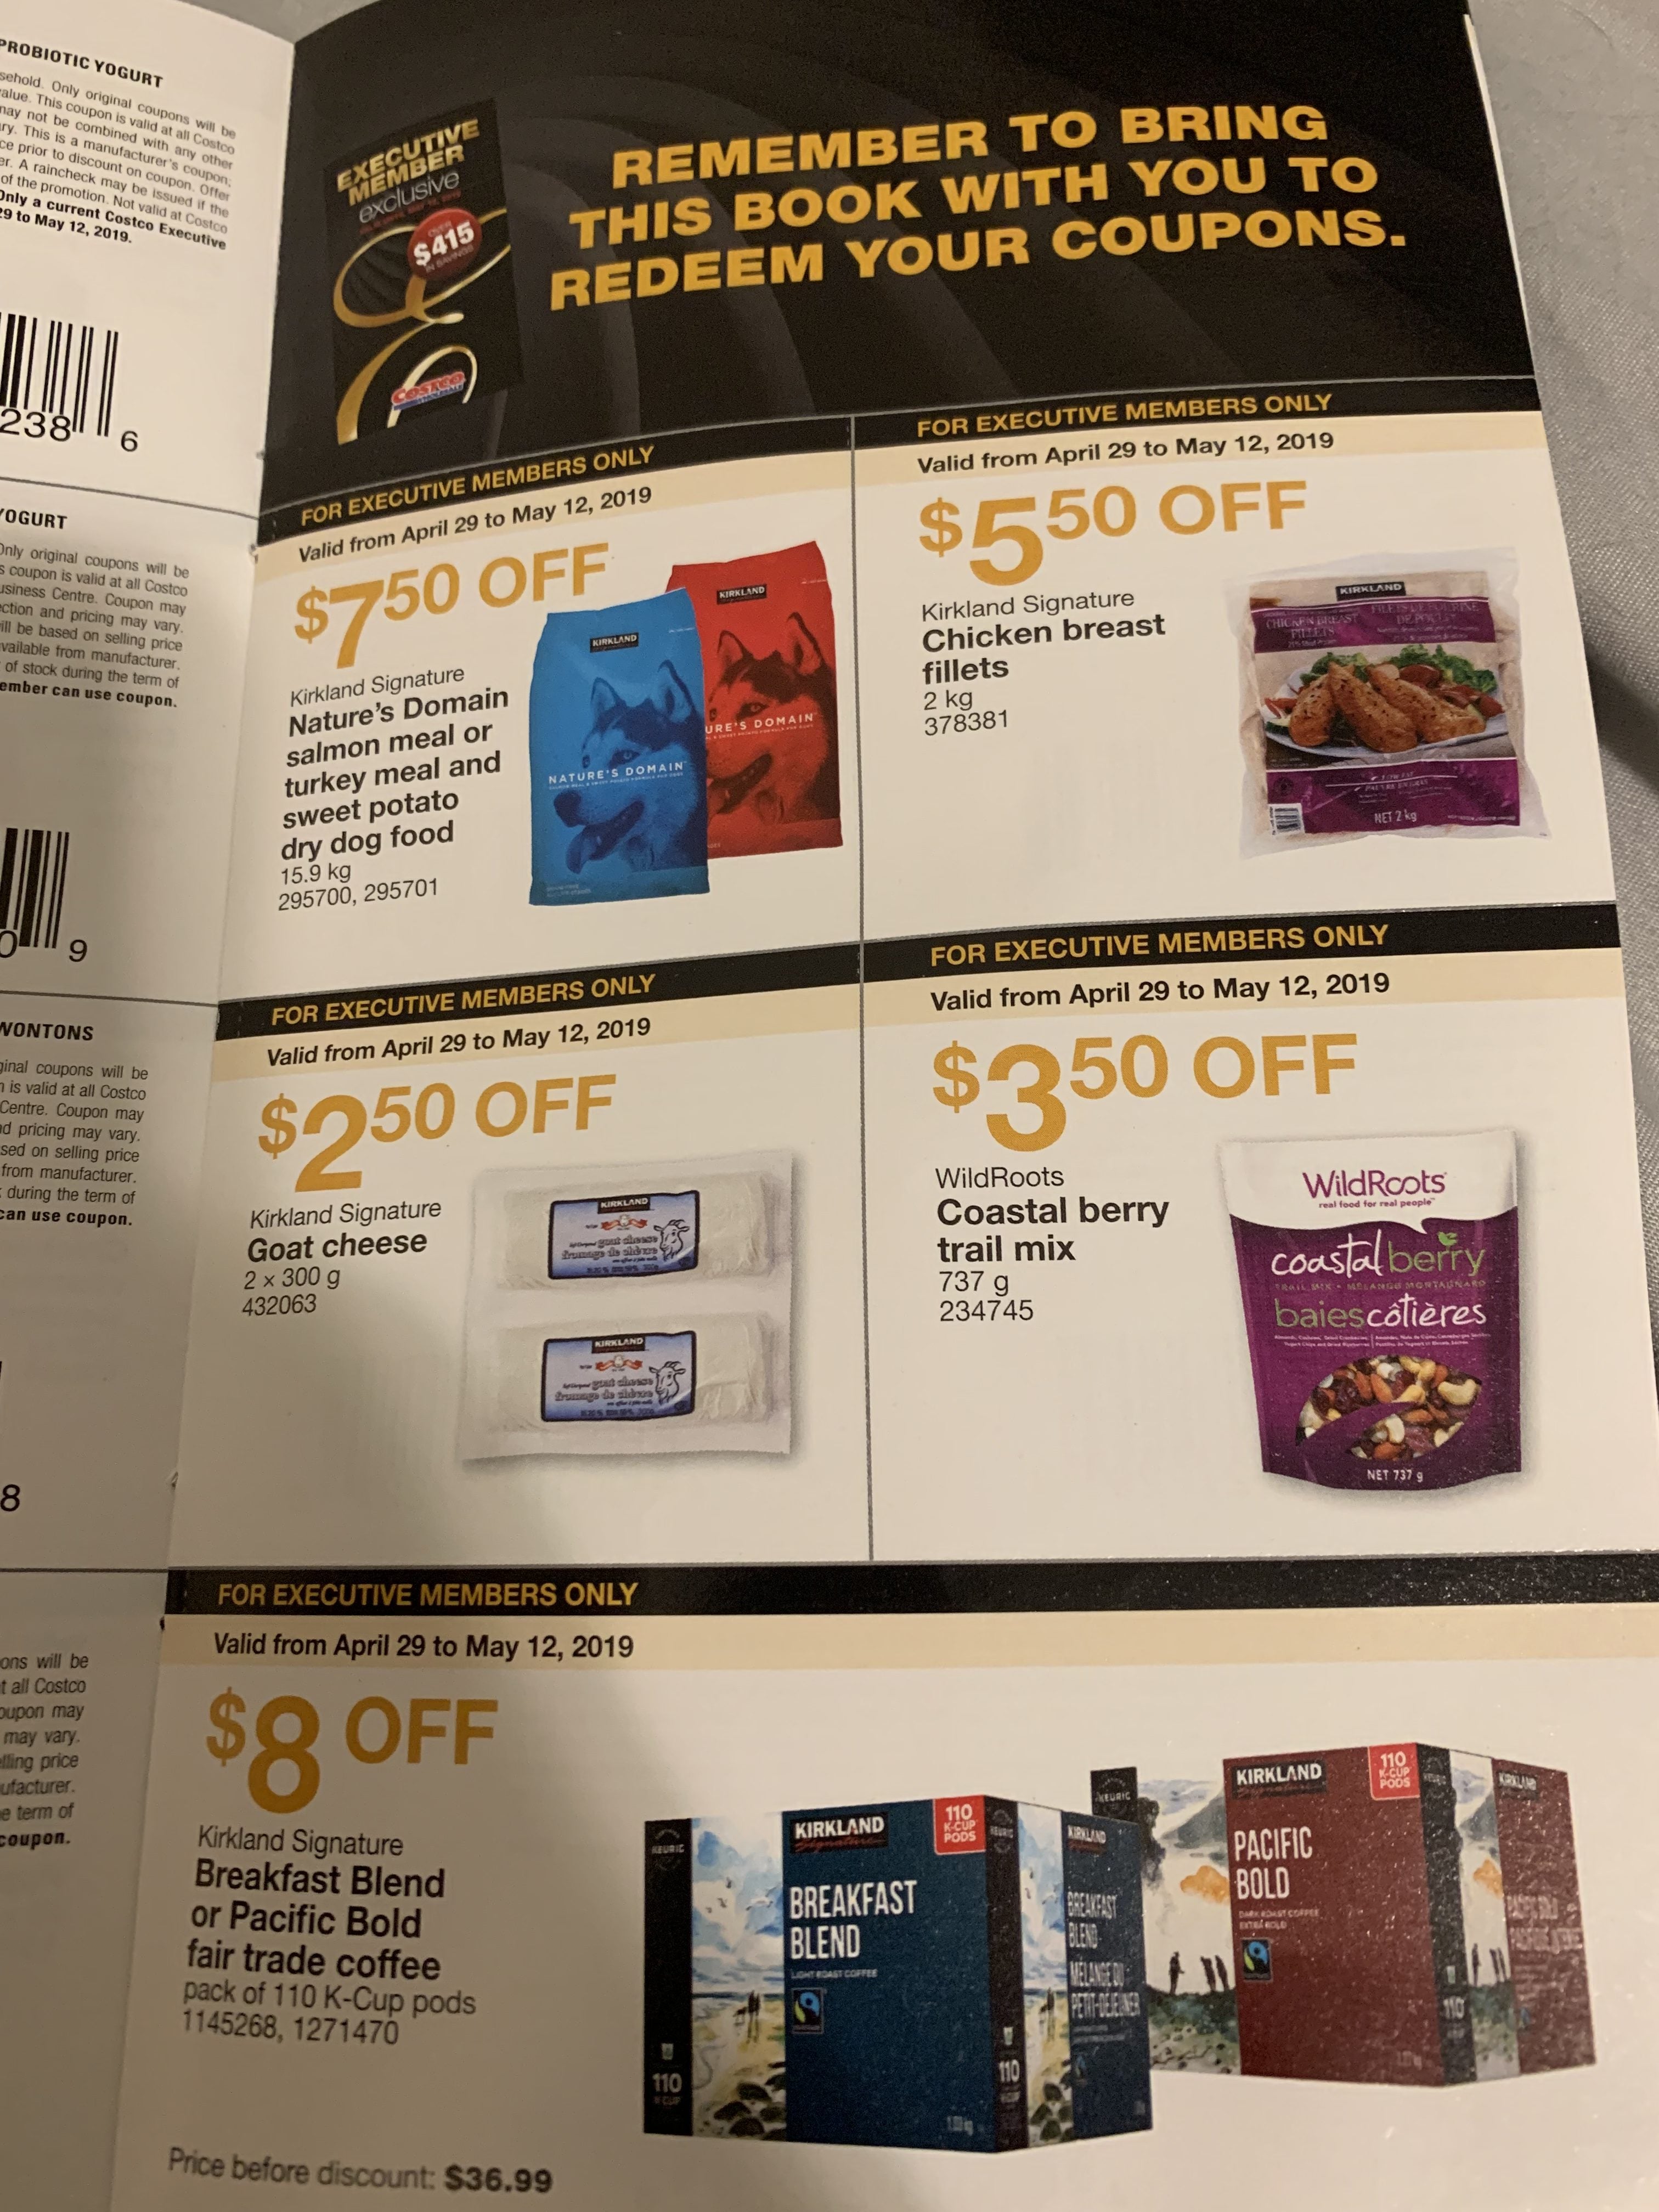 [Costco] Costco Executive Member Coupons are Back!